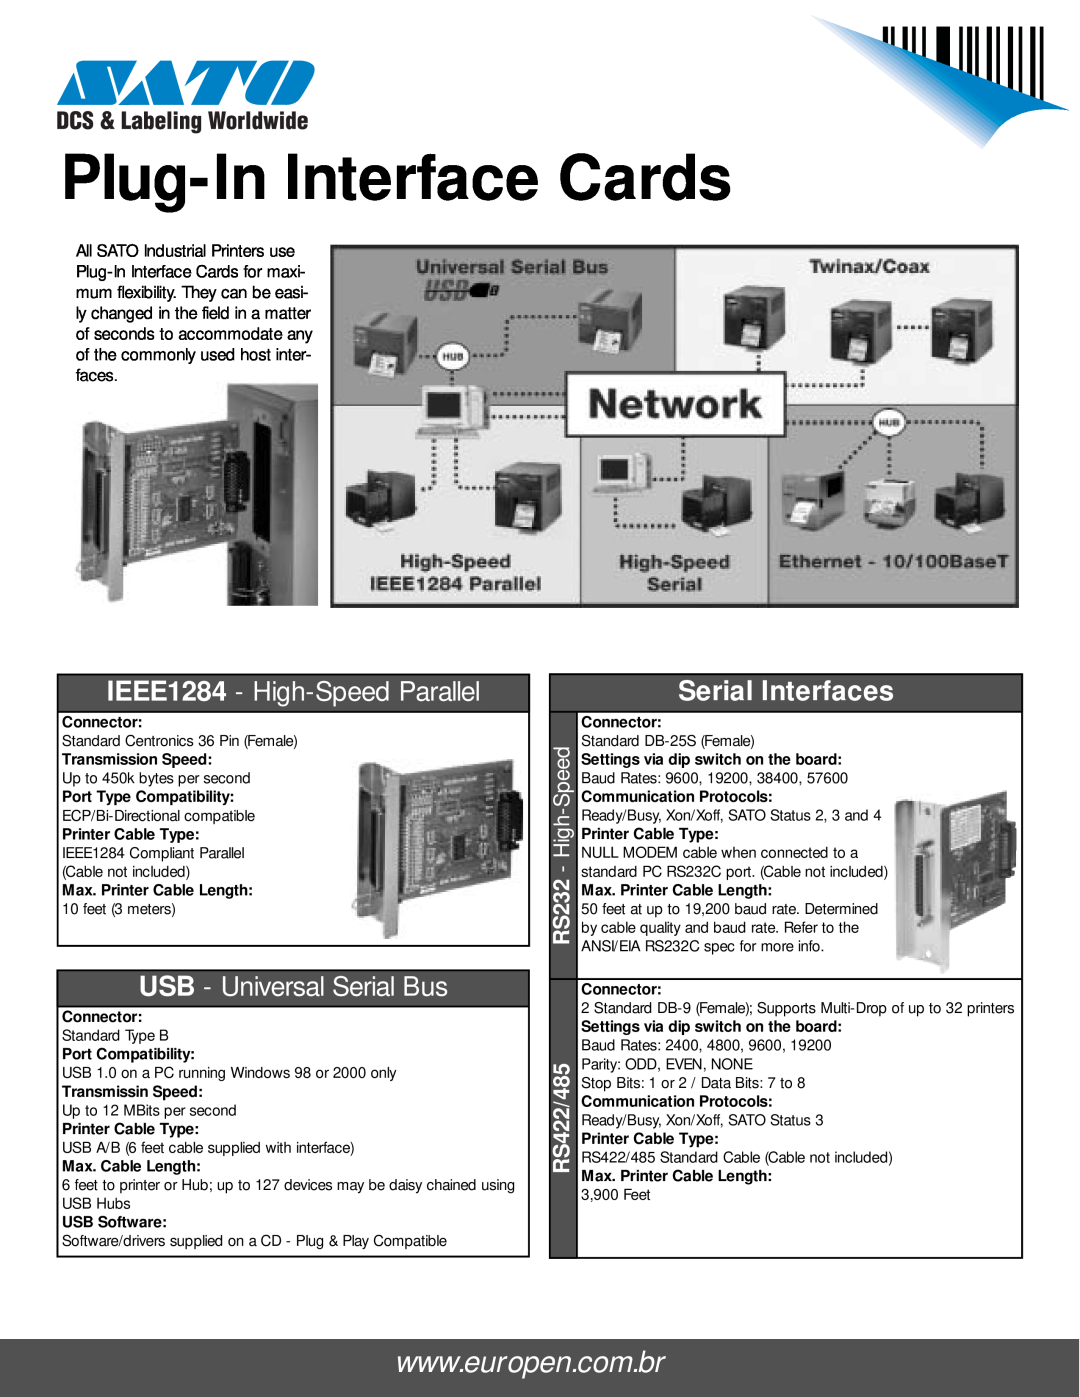 SATO RS485, RS232 manual Serial Interfaces, RS422/485, Plug-In Interface Cards, IEEE1284 - High-Speed Parallel 